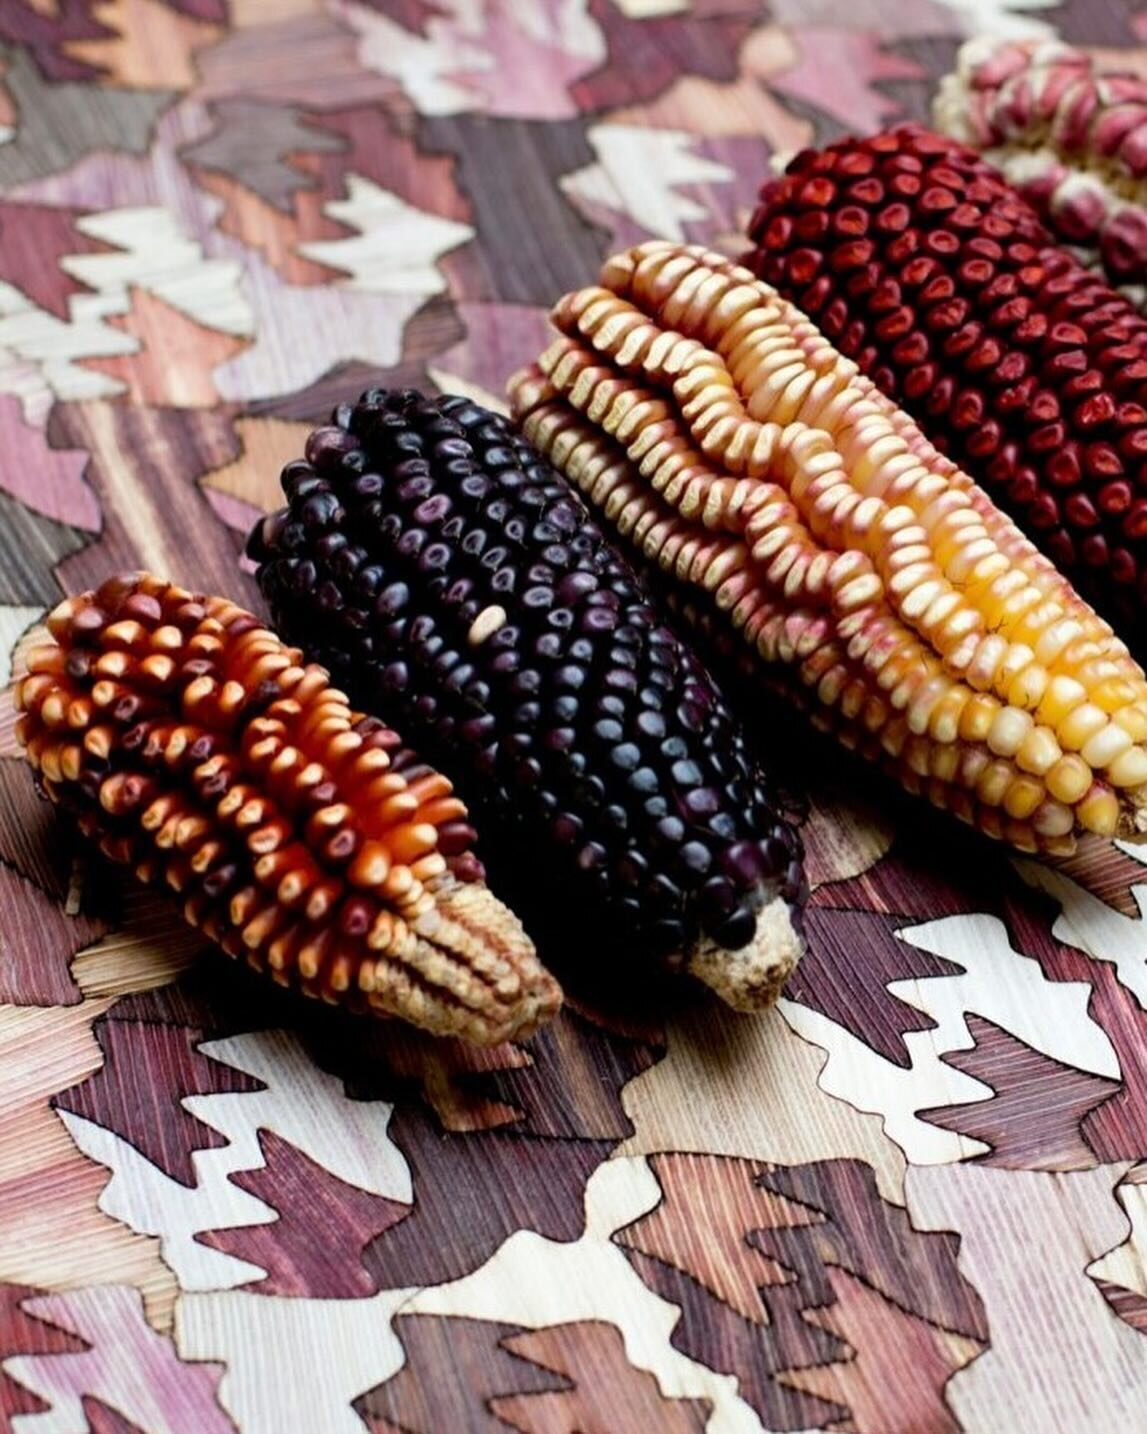 Mexican designer Fernando Laposse @fernandolaposse utilizes the colorful husks of heirloom corn species for a versatile veneer that restores biodiversity. Laposse has refined a technique for turning the husk into a marquetry material, giving this onc